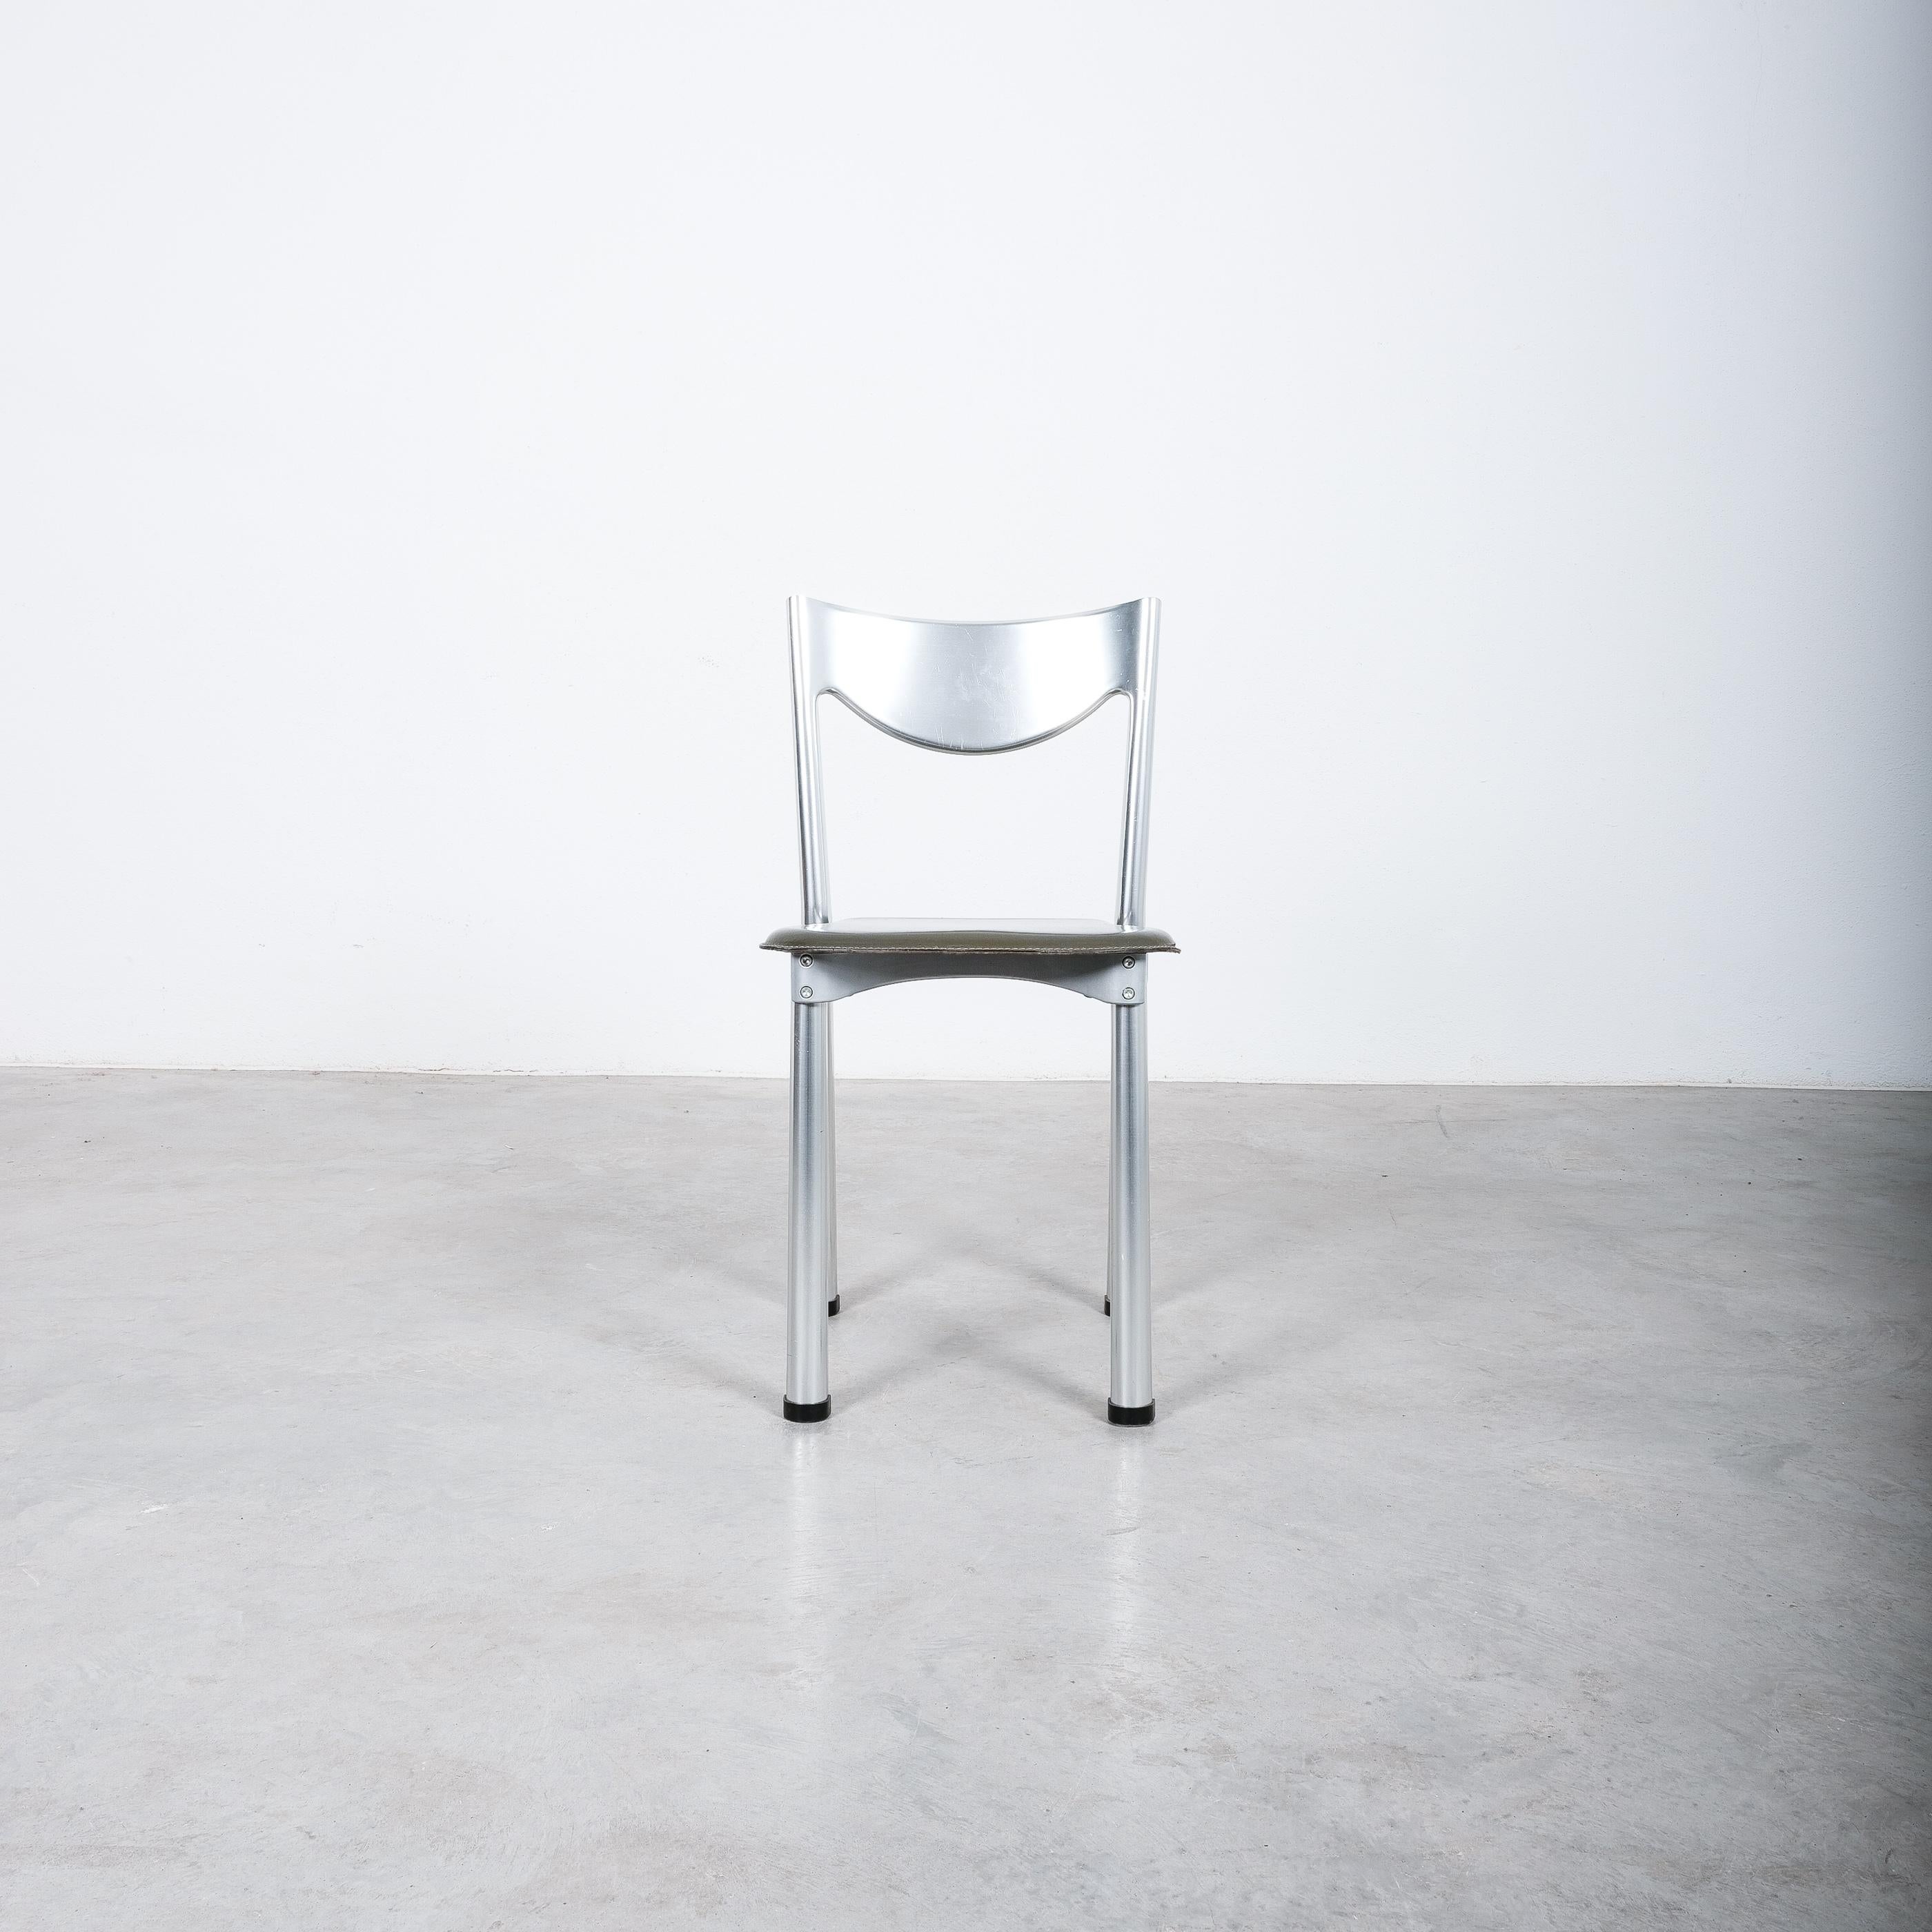 Rare set of 4 chairs by Antonello Mosca for Ycami Collection, circa 1980.

Sold as individual pieces.

Rare chairs made of aluminum and leather by Antonello Mosca. Postmodern chairs with cold-pressed shaped aluminum load-bearing structure.